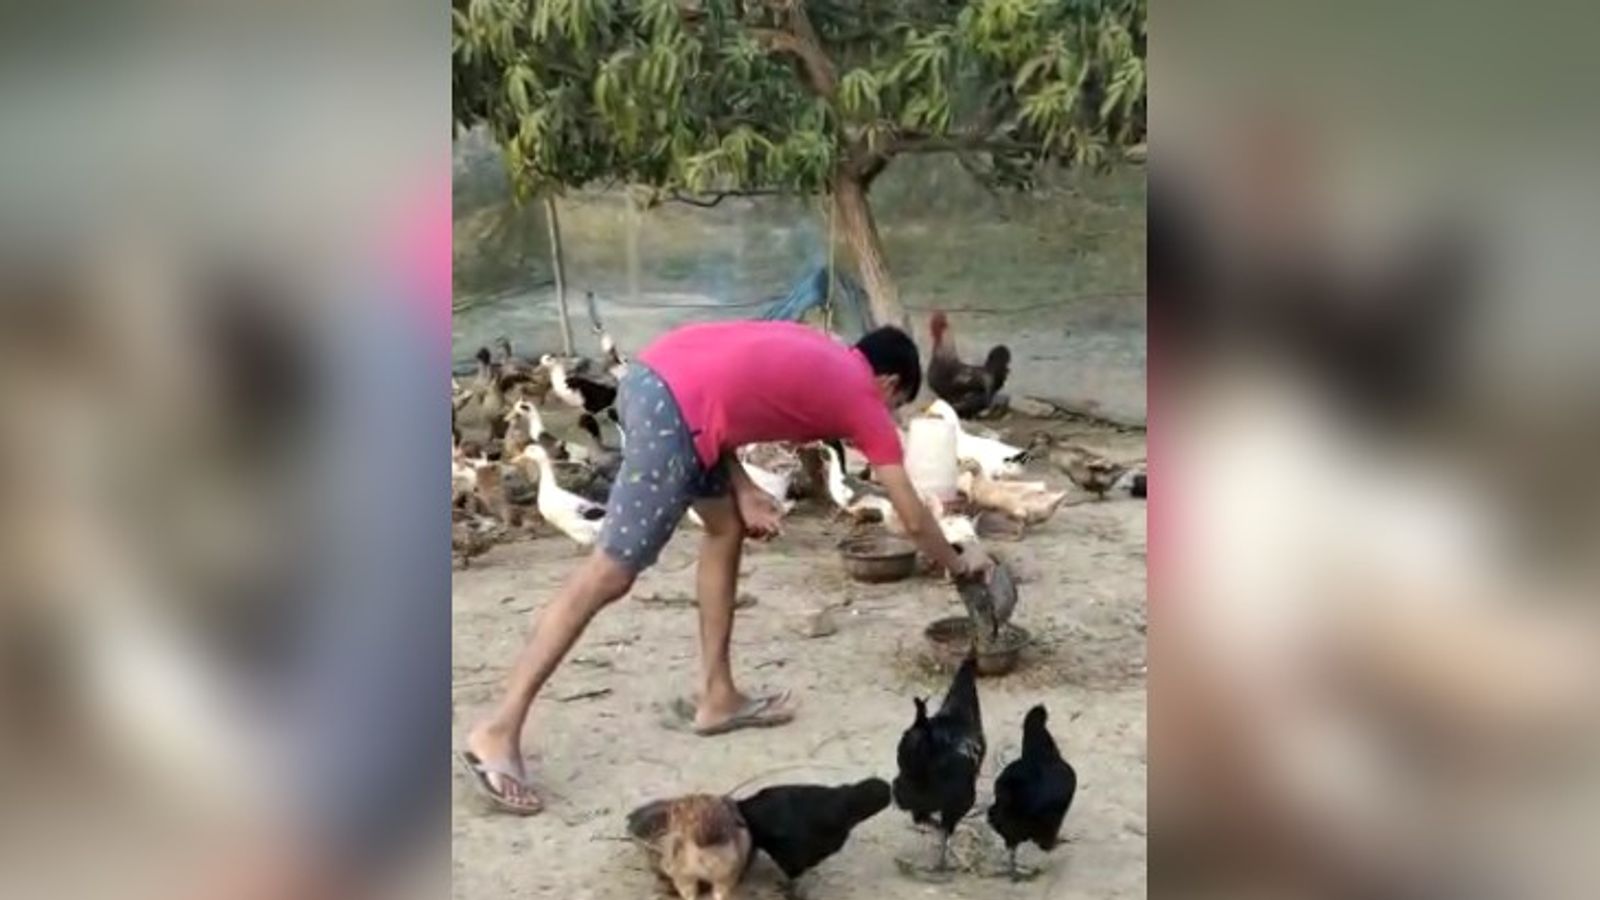 Rahul started his business with 100 ducks